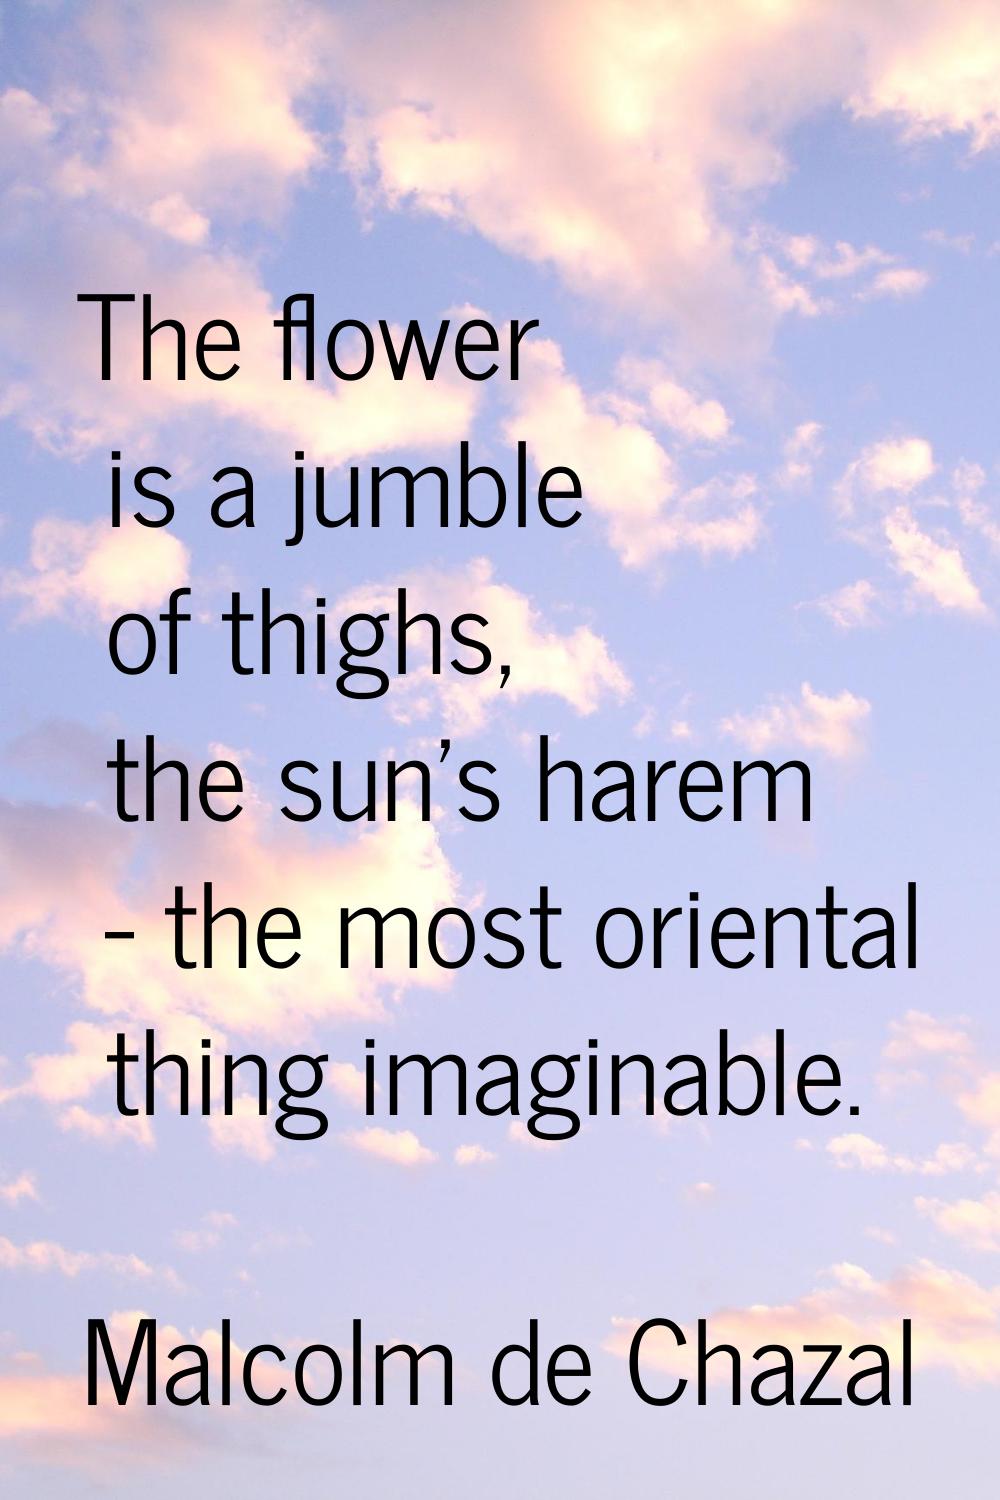 The flower is a jumble of thighs, the sun's harem - the most oriental thing imaginable.